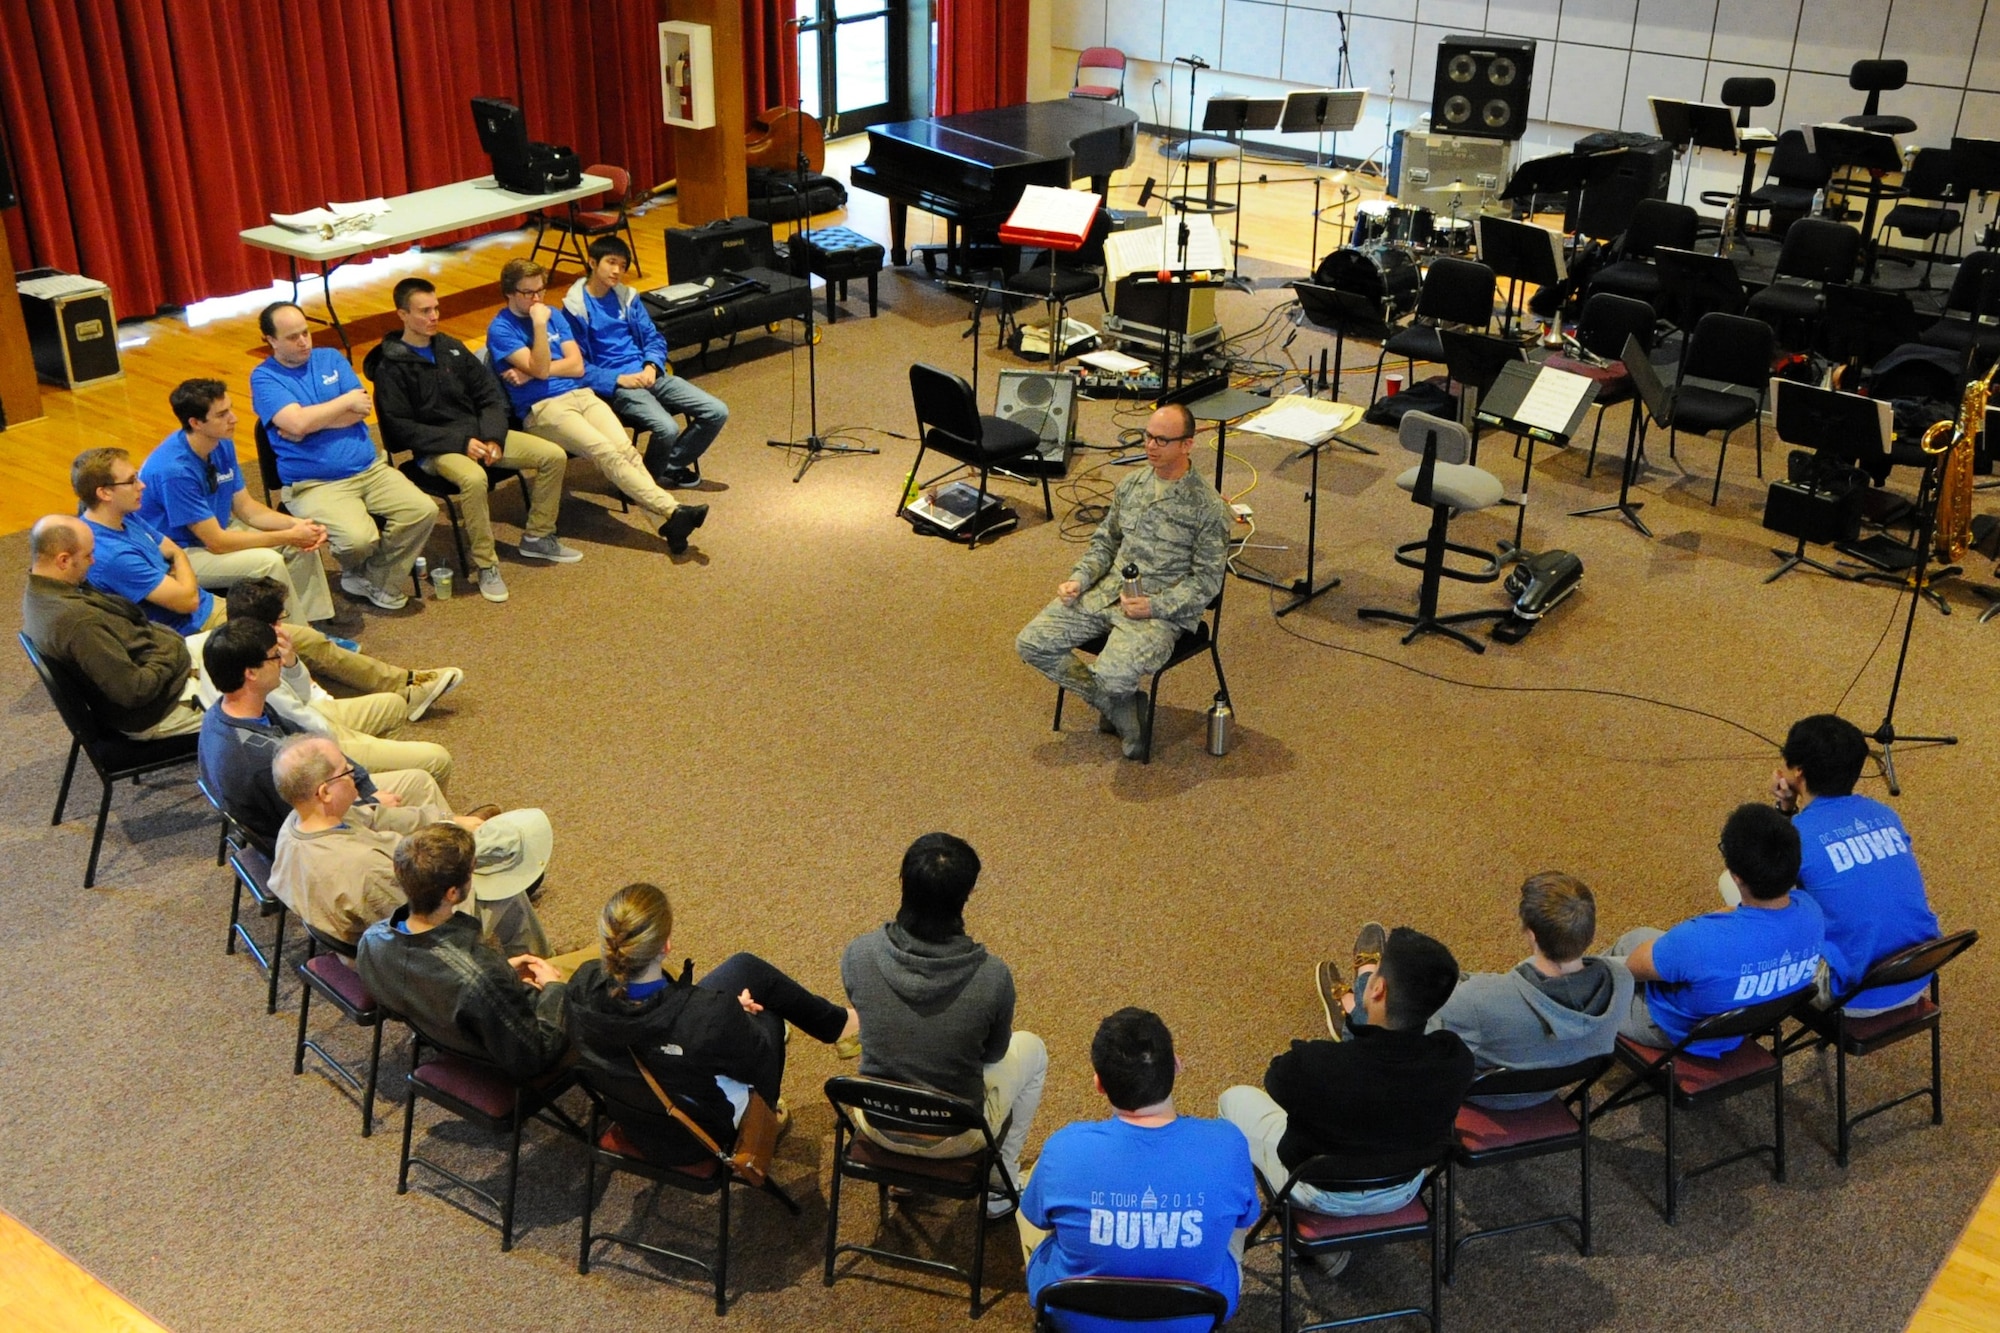 U.S. Air Force Concert Band trumpeter Technical Sgt. Micah Killion speaks to students from Duke University during a Masterclass session at Joint Base Anacostia-Bolling, Washington D.C., Oct. 13, 2015. The members of Duke University’s Wind Symphony visited the U.S. Air Force Band today for an immersion in music and Air Force culture. The students attended Masterclass sessions led by performers from the Band to further develop mastery of their instruments before watching the Concert Band’s final rehearsal before their fall tour. (U.S. Air Force photo/Staff Sgt. Matt Davis)